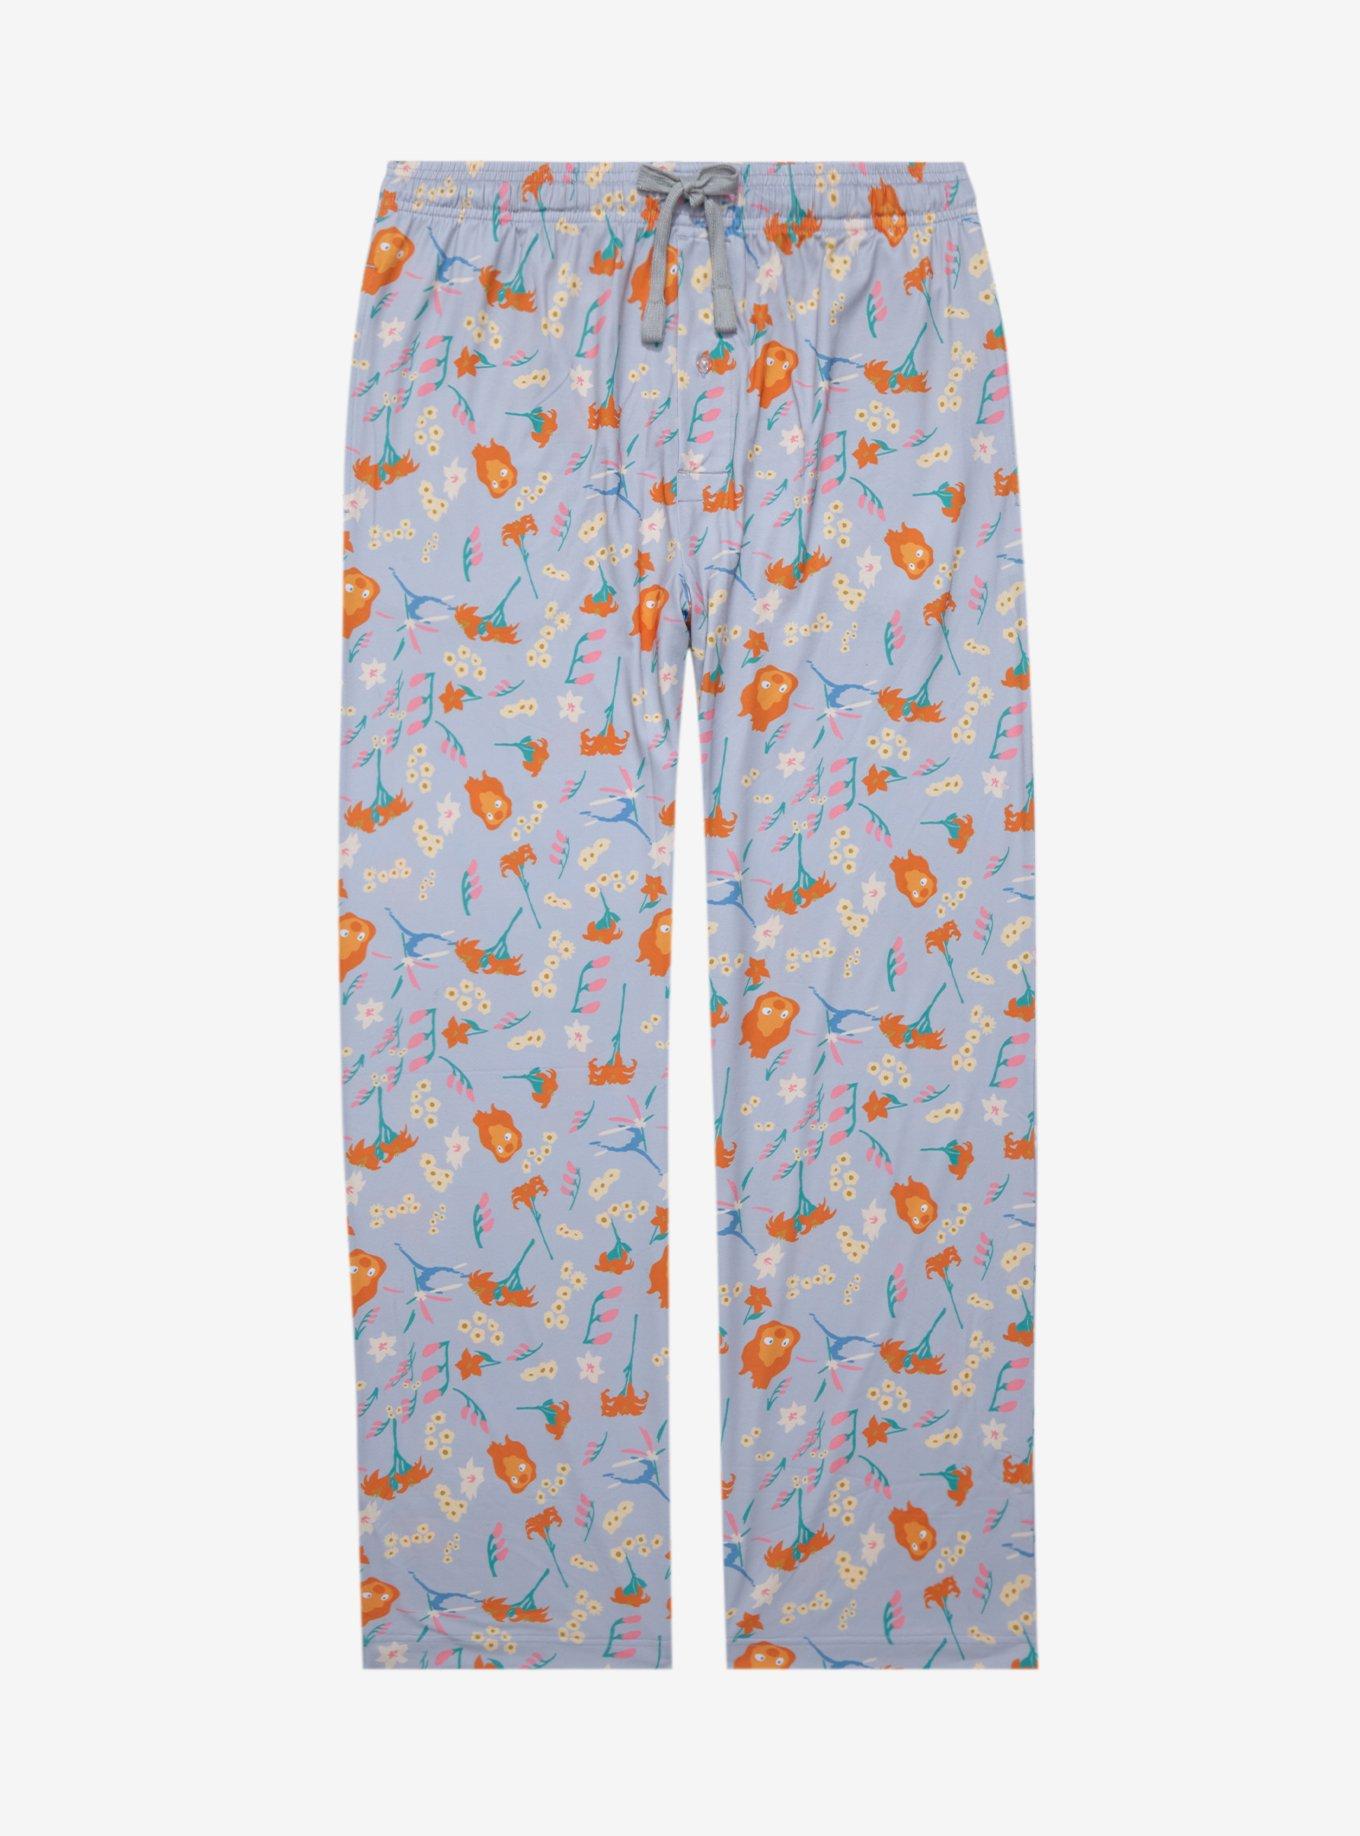 Studio Ghibli Howl’s Moving Castle Calcifer Floral Allover Print Sleep Pants - BoxLunch Exclusive, GREY, hi-res